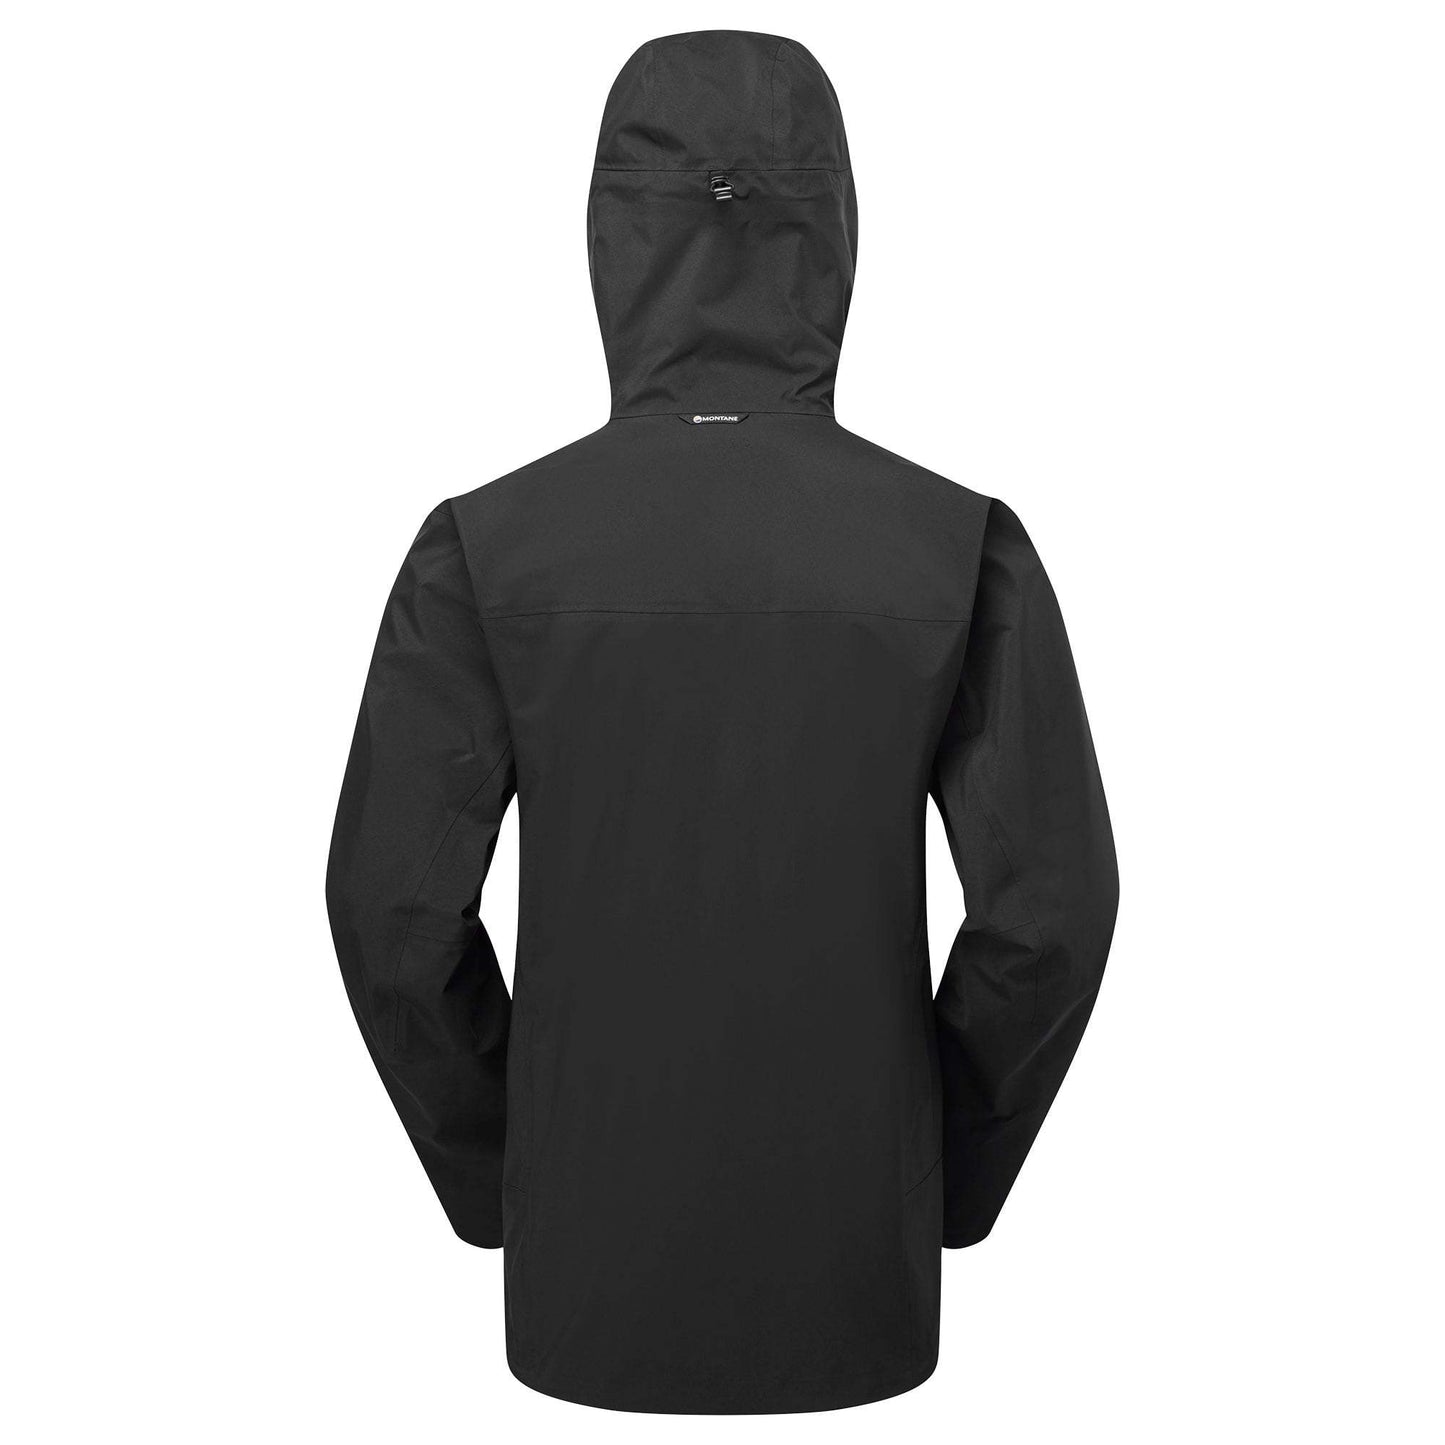 Men’s Phase XT Jacket by Montane - The Luxury Promotional Gifts Company Limited